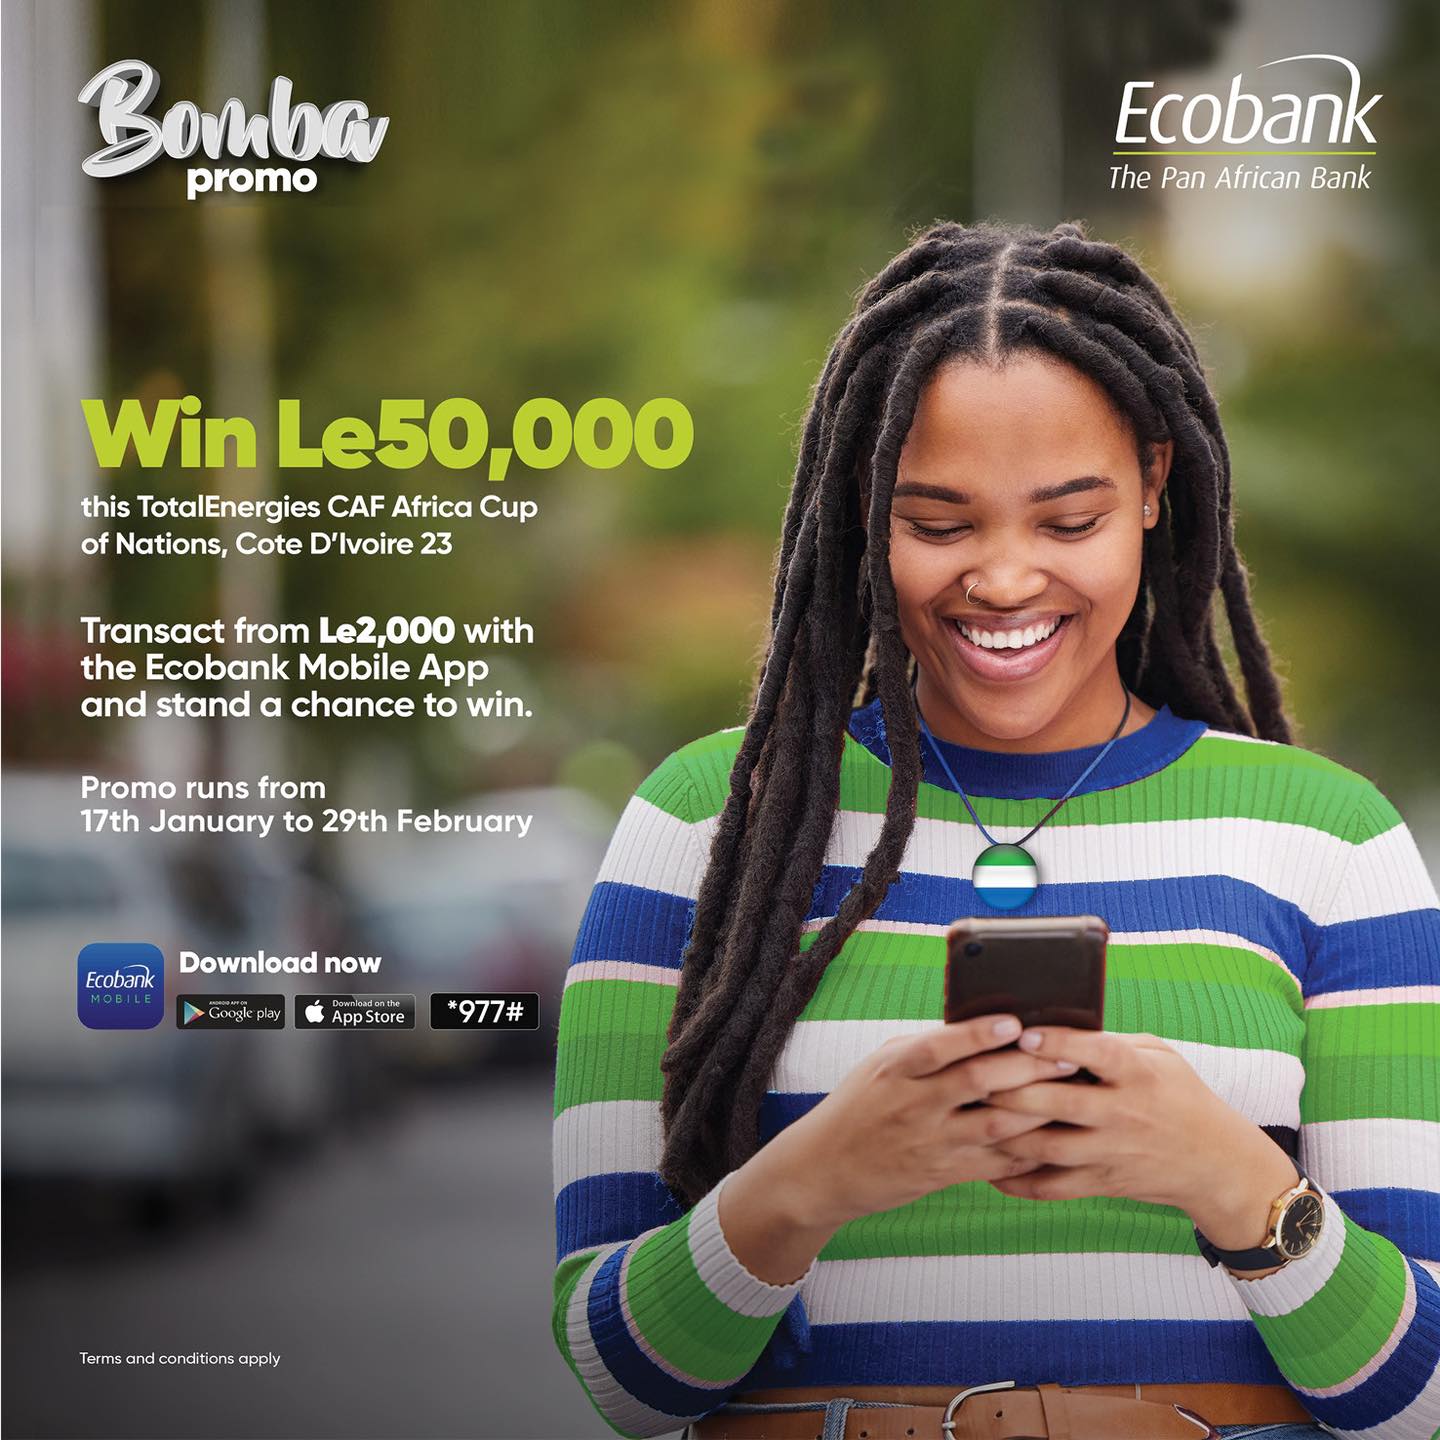 Another day, another opportunity to WIN Le50,000!!! Use the Ecobank Mobile App ✅ Send/receive Le2,000 or more ✅ And stand a chance to celebrate the #AFCON in style. #ecobankmobileapp #ecobankmobile #AFCON #Bombapromo #bomba